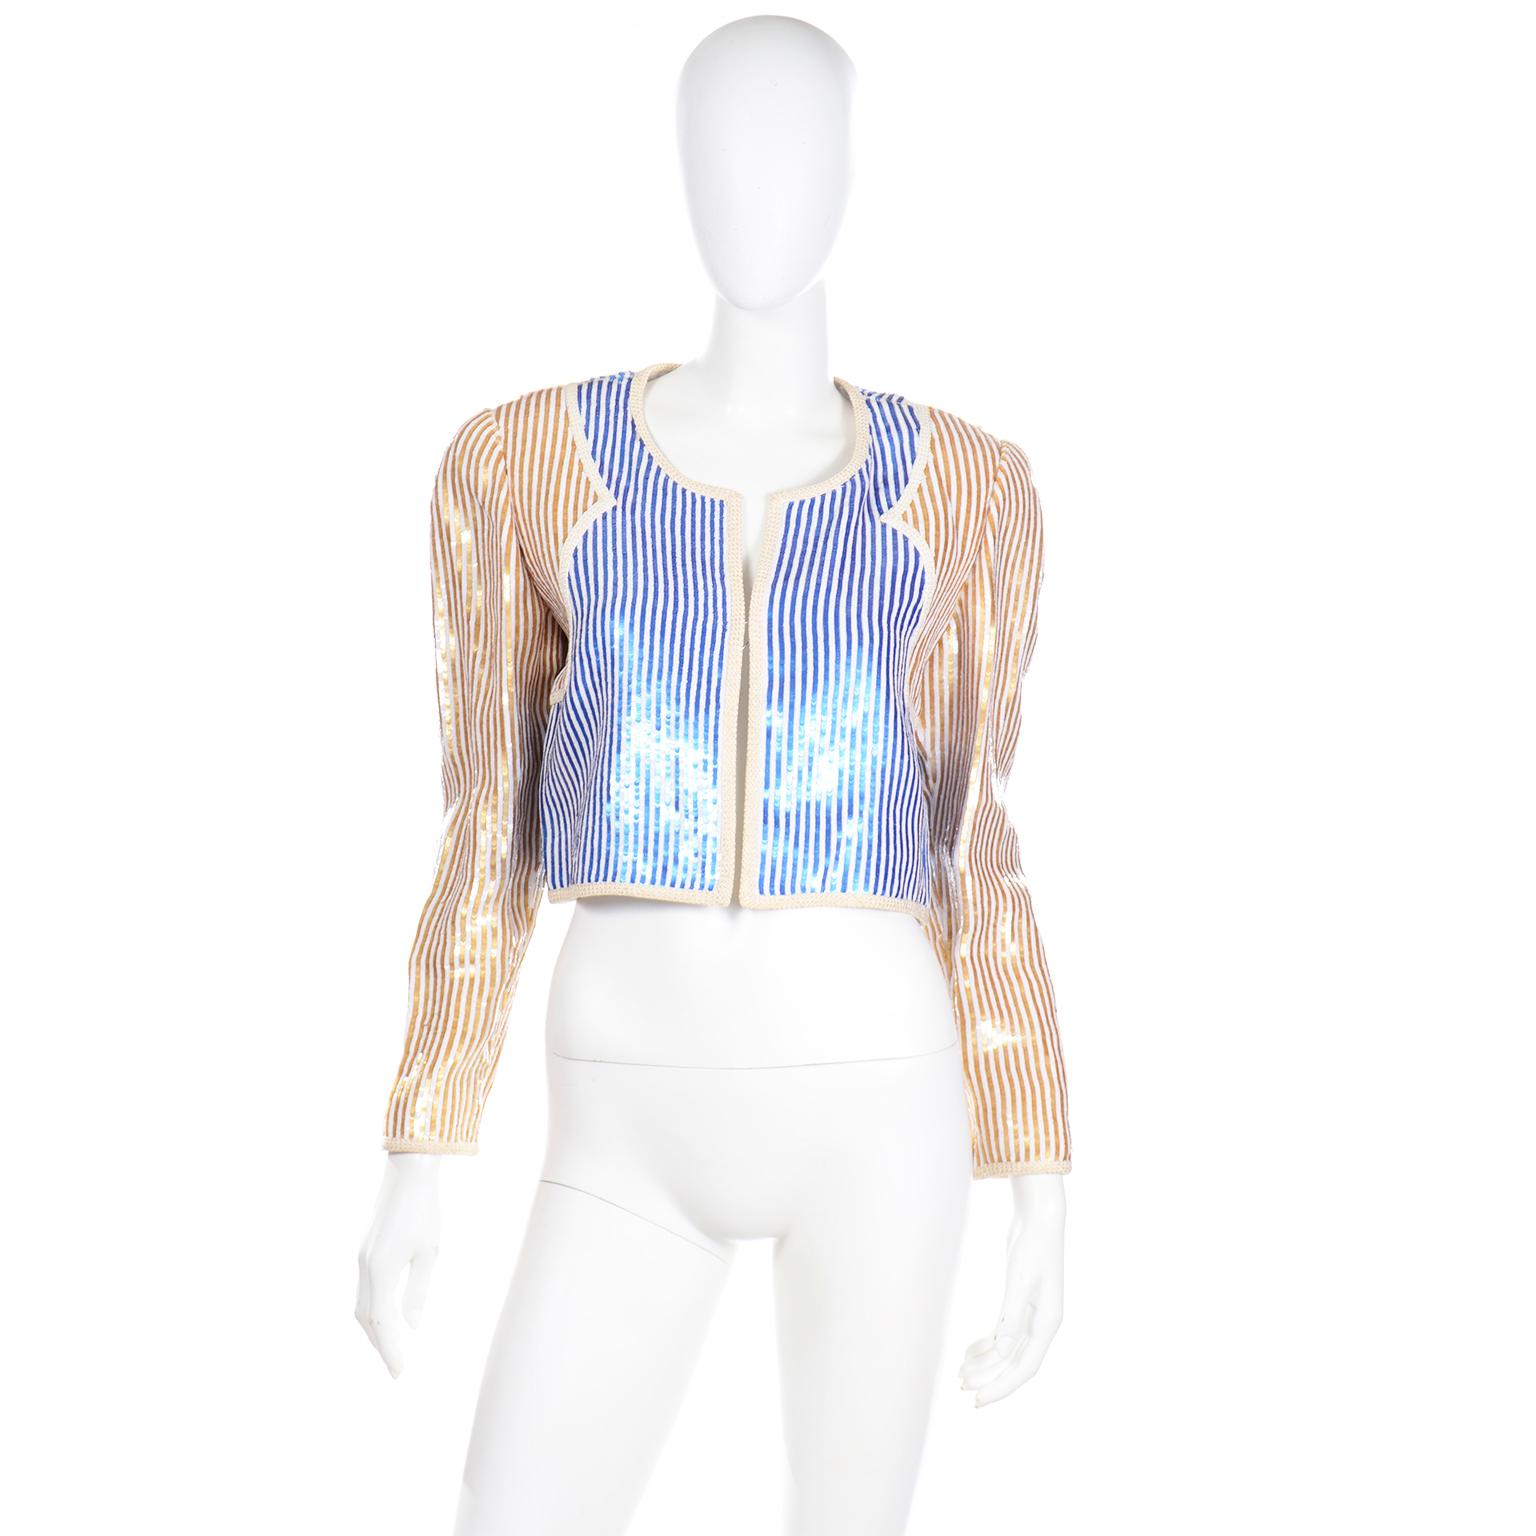 This gorgeous vintage Bill Blass evening jacket is completely covered in mini blue, white and gold paillettes. The jacket has ivory braided trim and is open in the front. This would be a perfect piece to wear with high waisted pants, a skirt or over